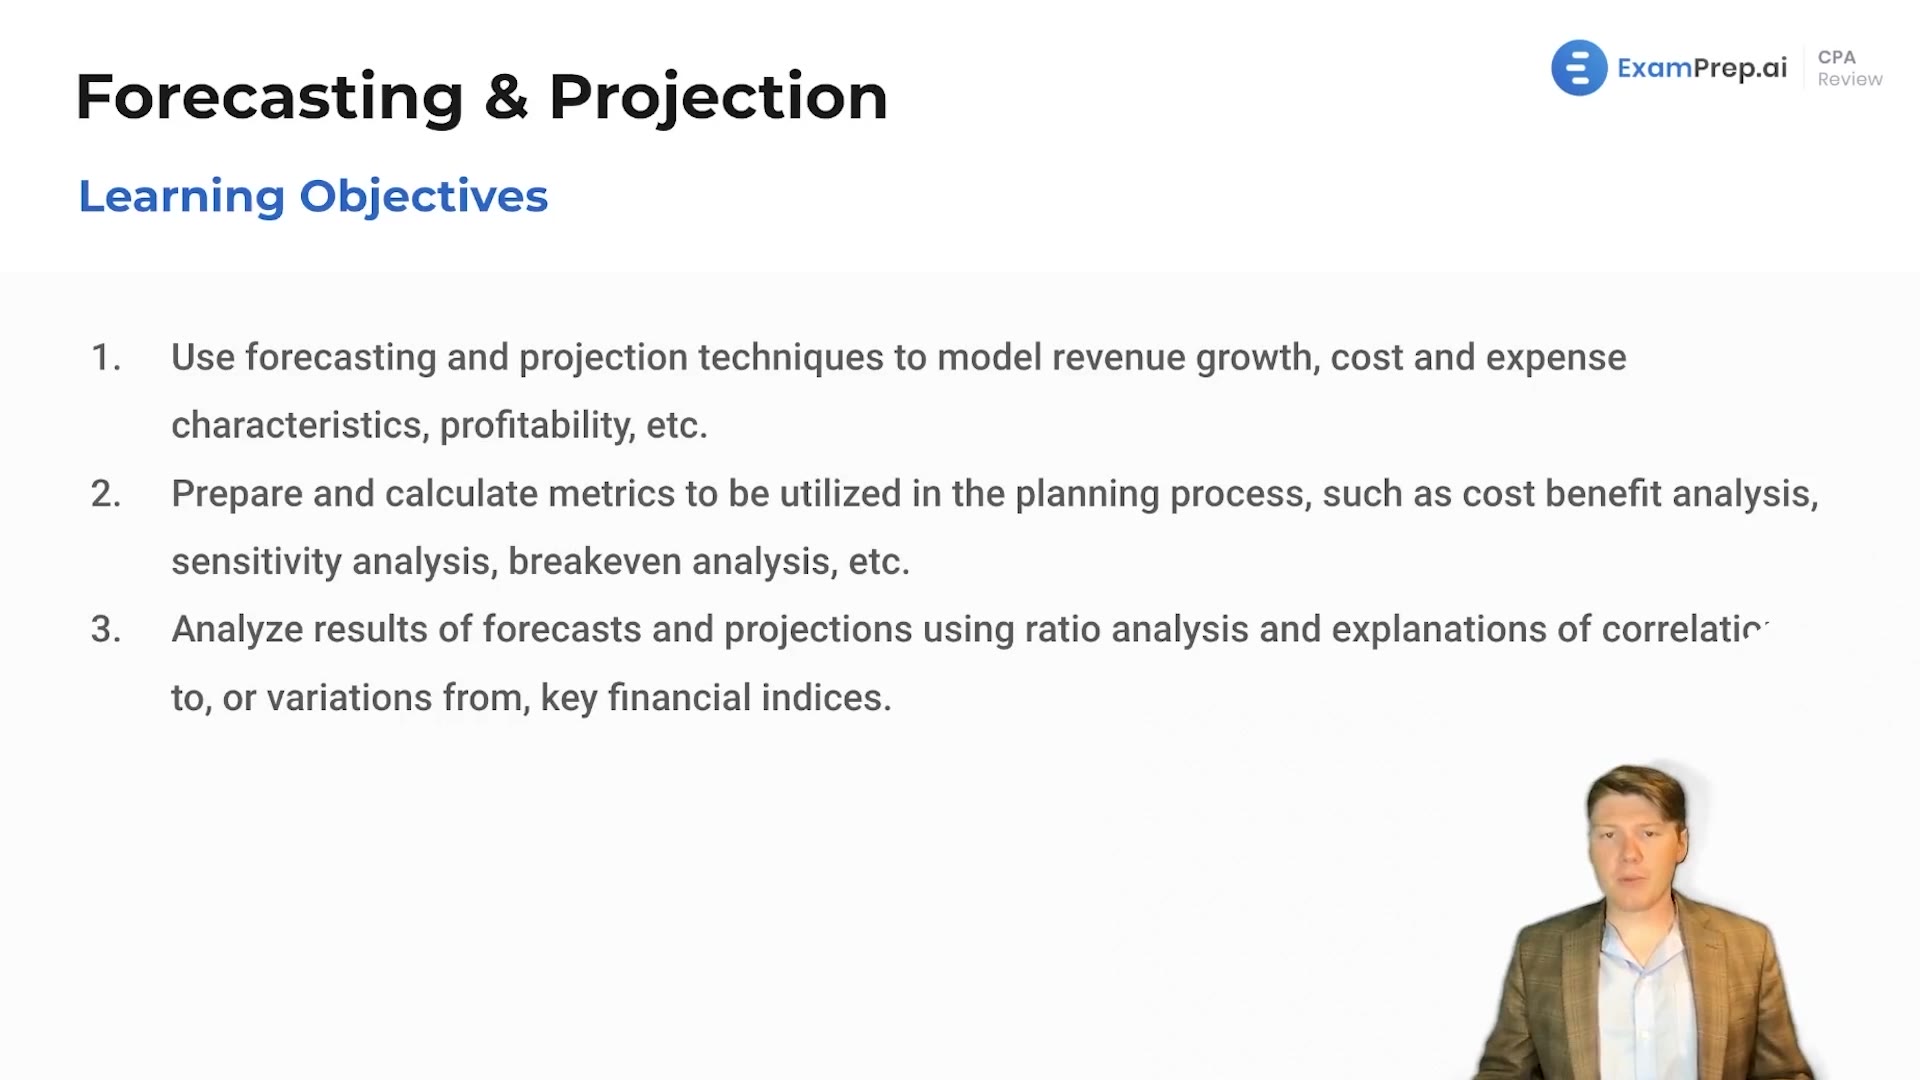 Forecasting and Projection Overview and Objectives lesson thumbnail